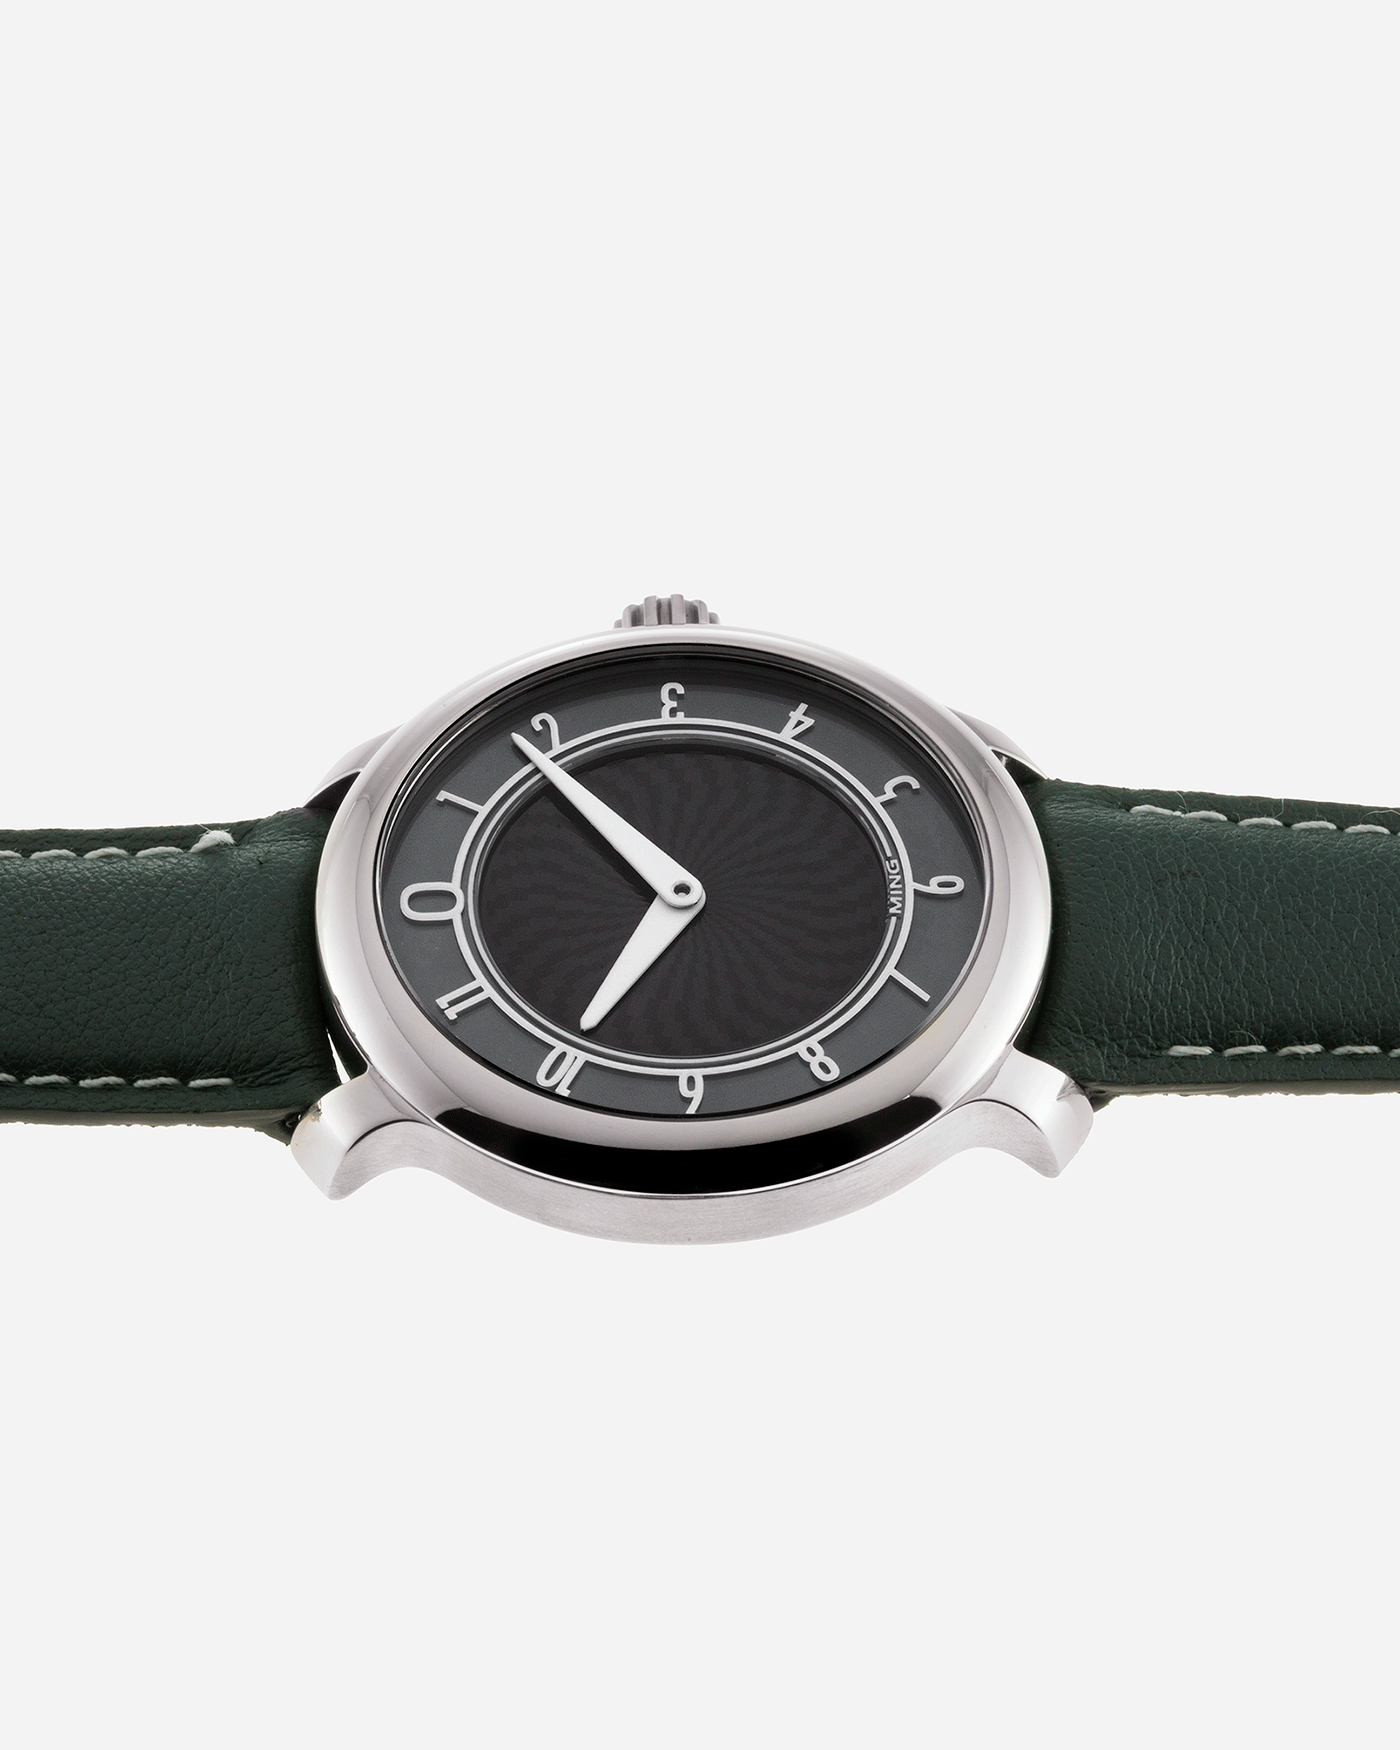 Brand: Ming Year: 2017 Model: 17.01 Material: Grade 5 Titanium Movement: Hand-winding mechanical movement Sellita SW210-1 Case Diameter: 38mm Strap: Jean Rousseau Green Smooth Calf for MING